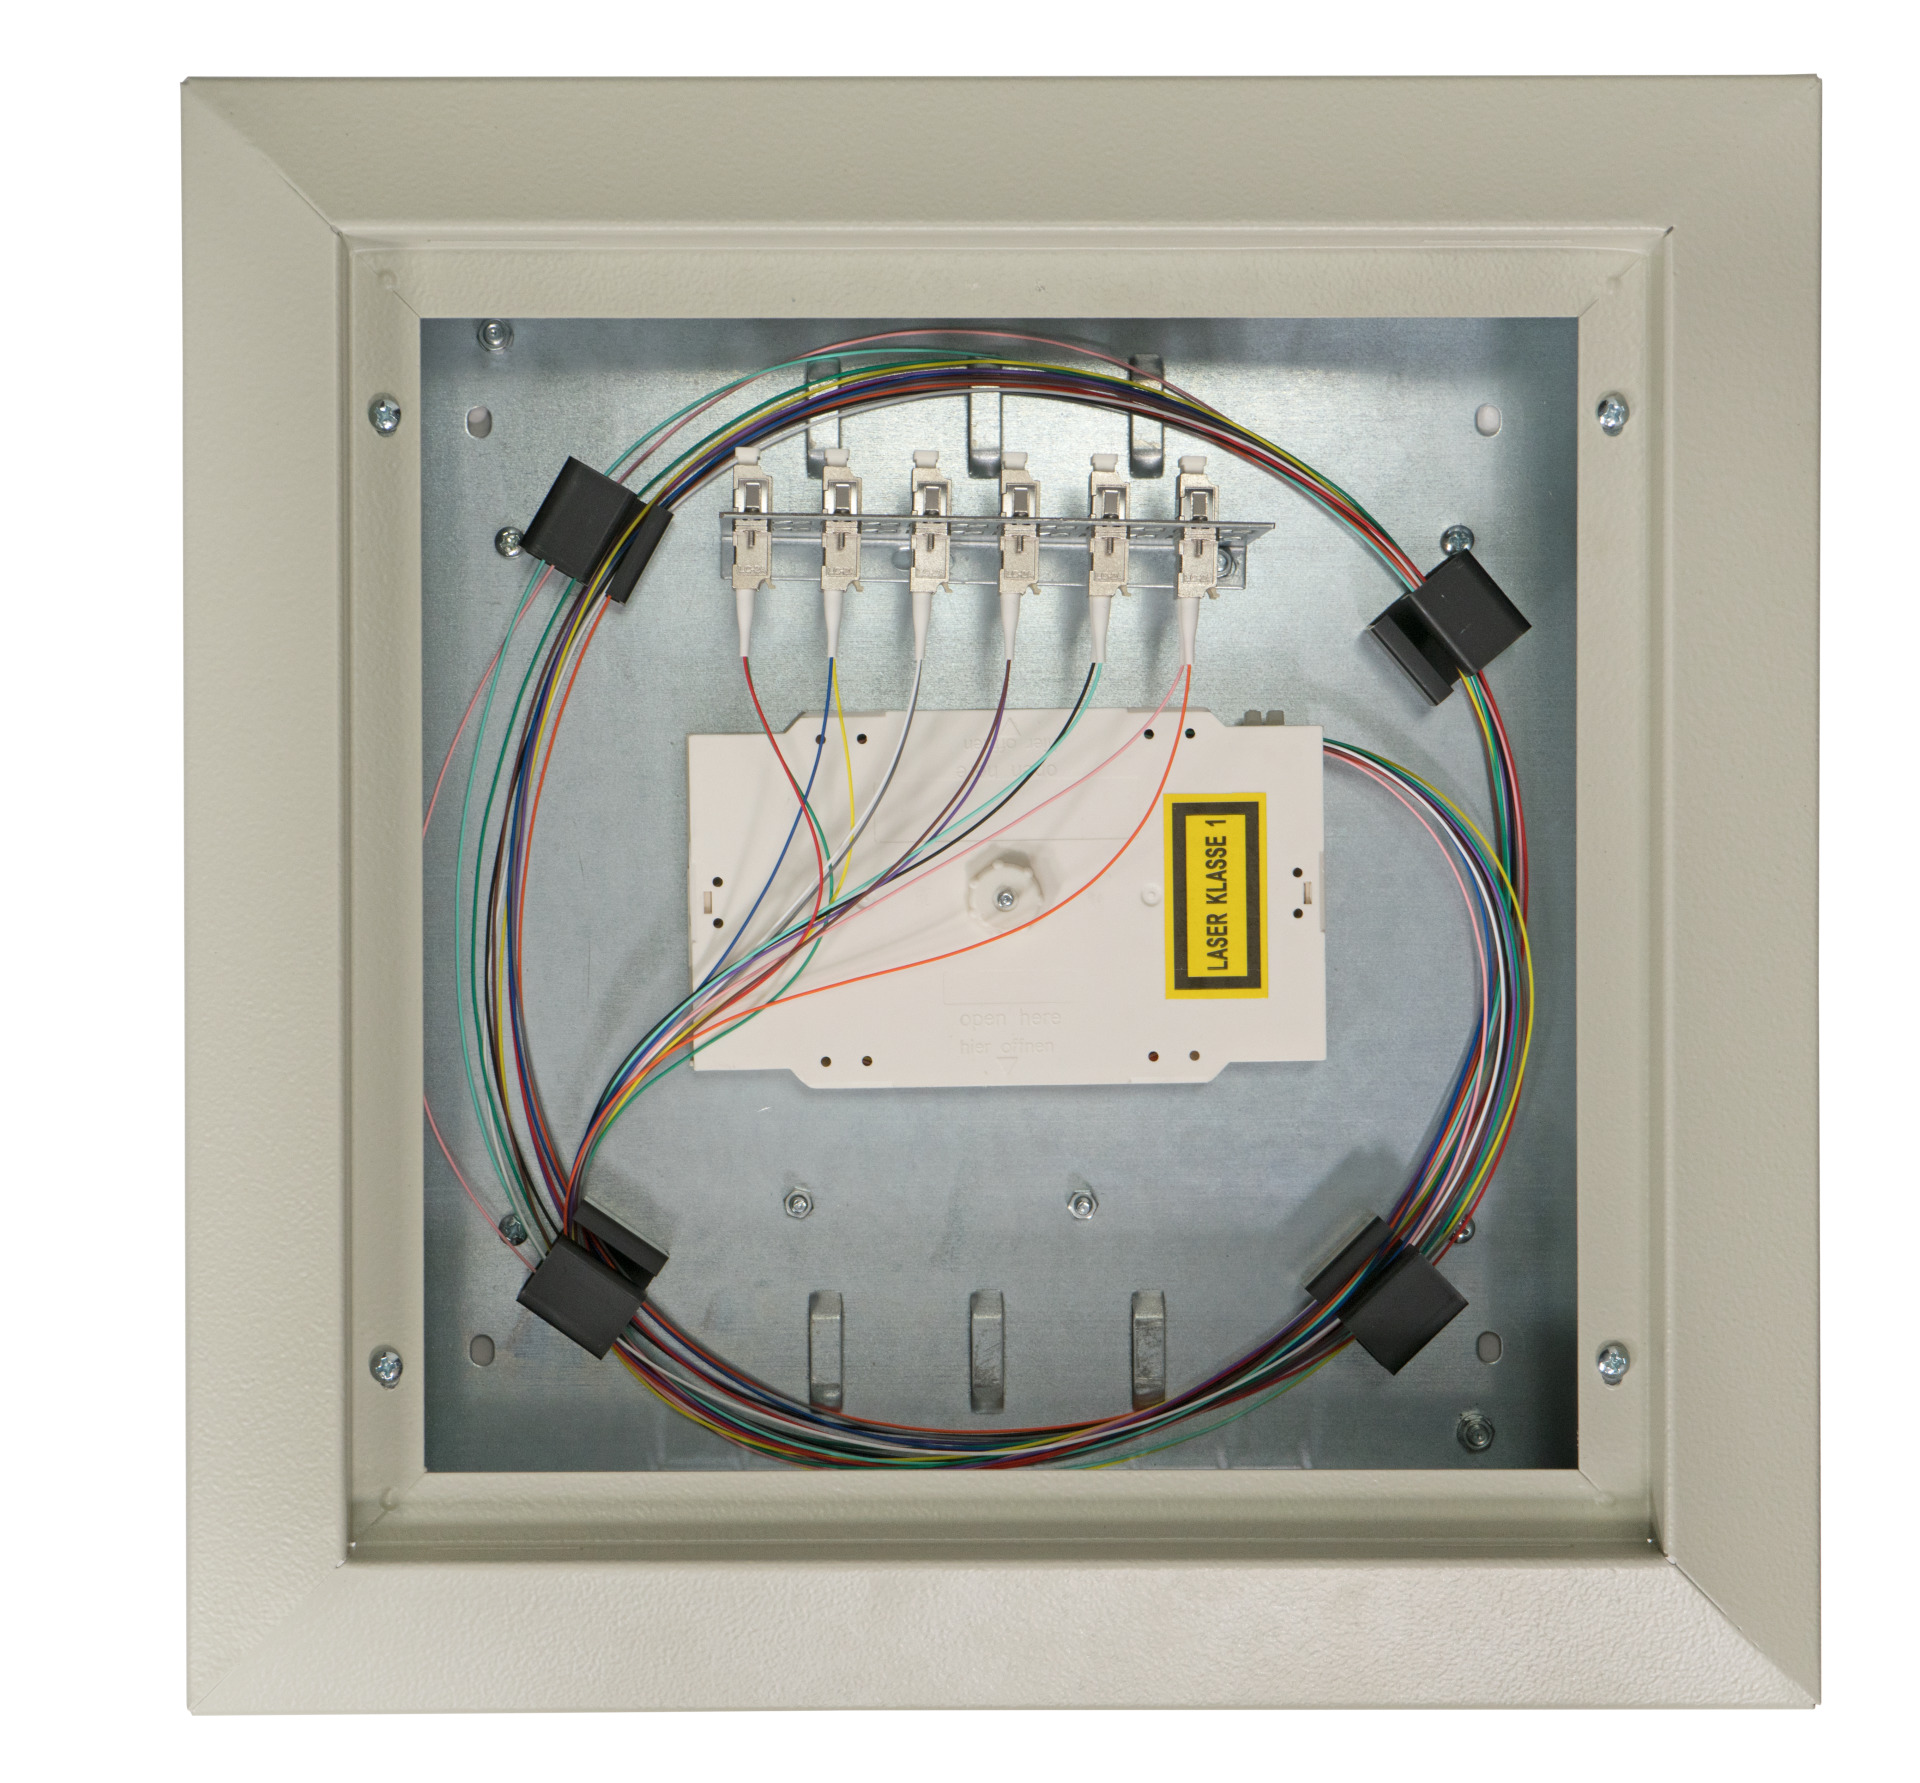 FTTH In Wall Distributor incl. splice cassette and holder for adapters